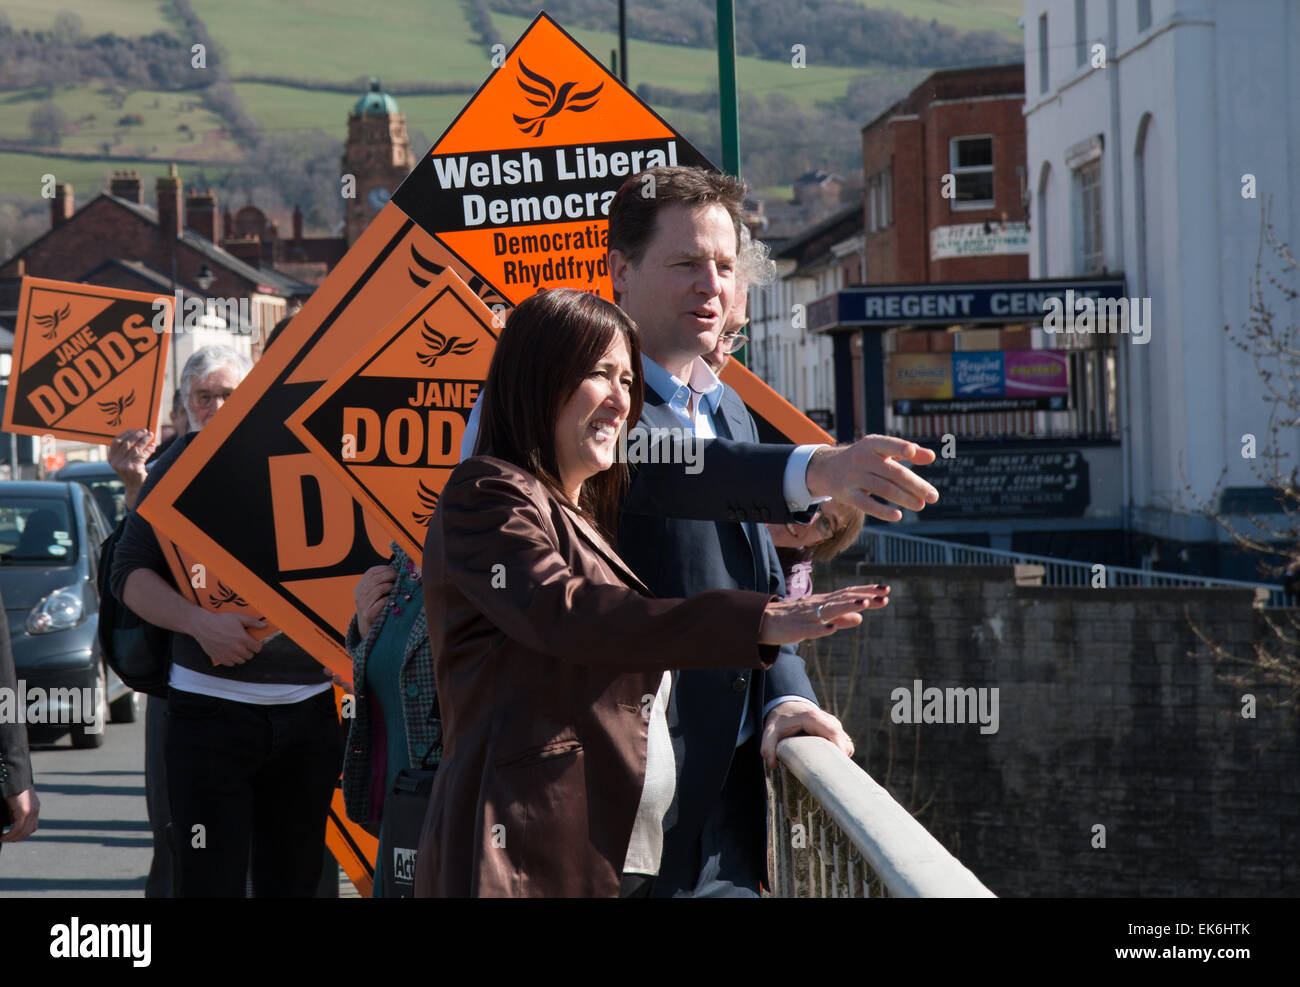 Newtown, UK. 7th April, 2015. Deputy Prime Minister & Leader of the Lib Dems, Nick Clegg, visits Newtown in the Montgomeryshire Constituency as a part of his campaign for votes in the forthcoming General Election, UK. © Jon Freeman/Alamy Live News Stock Photo